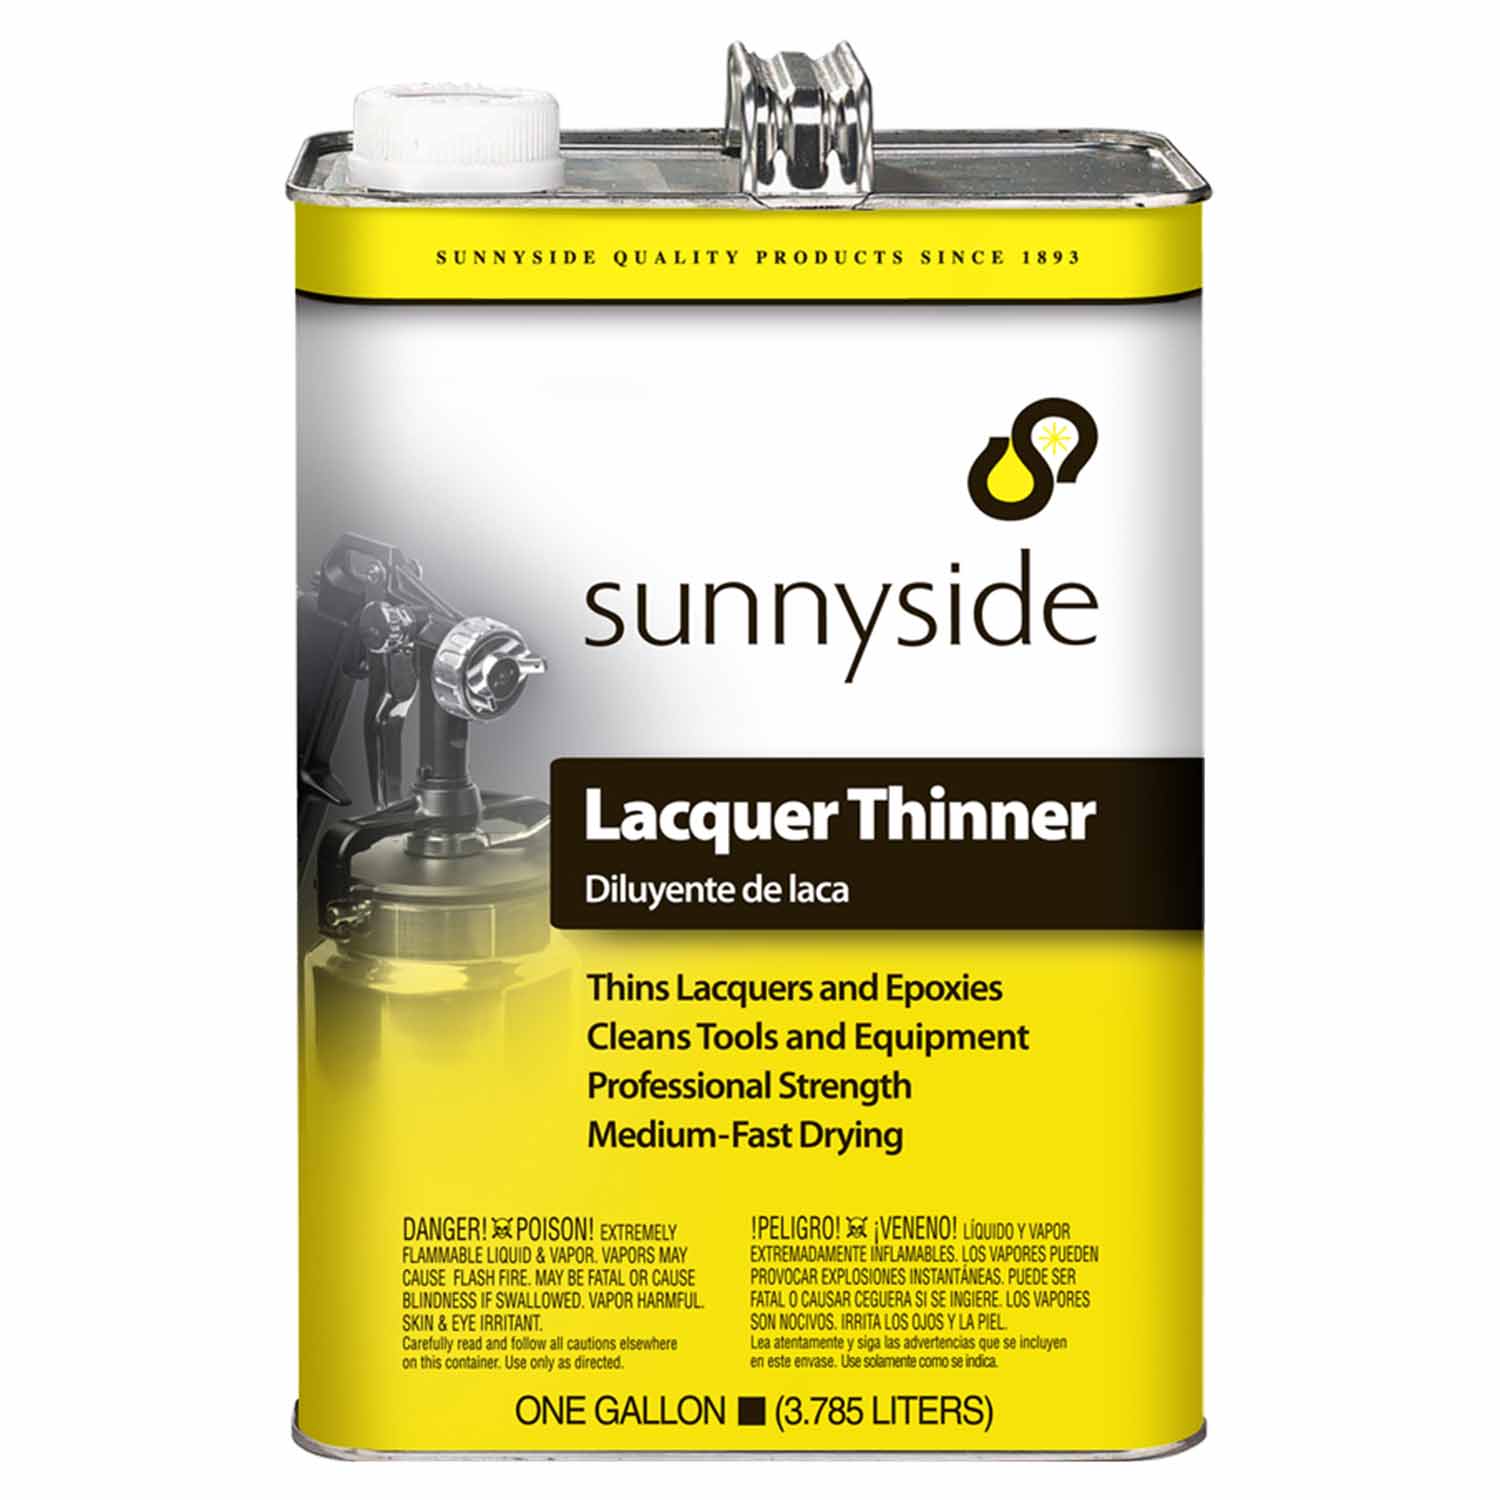 Standard Lacquer Thinner Solvent Gal